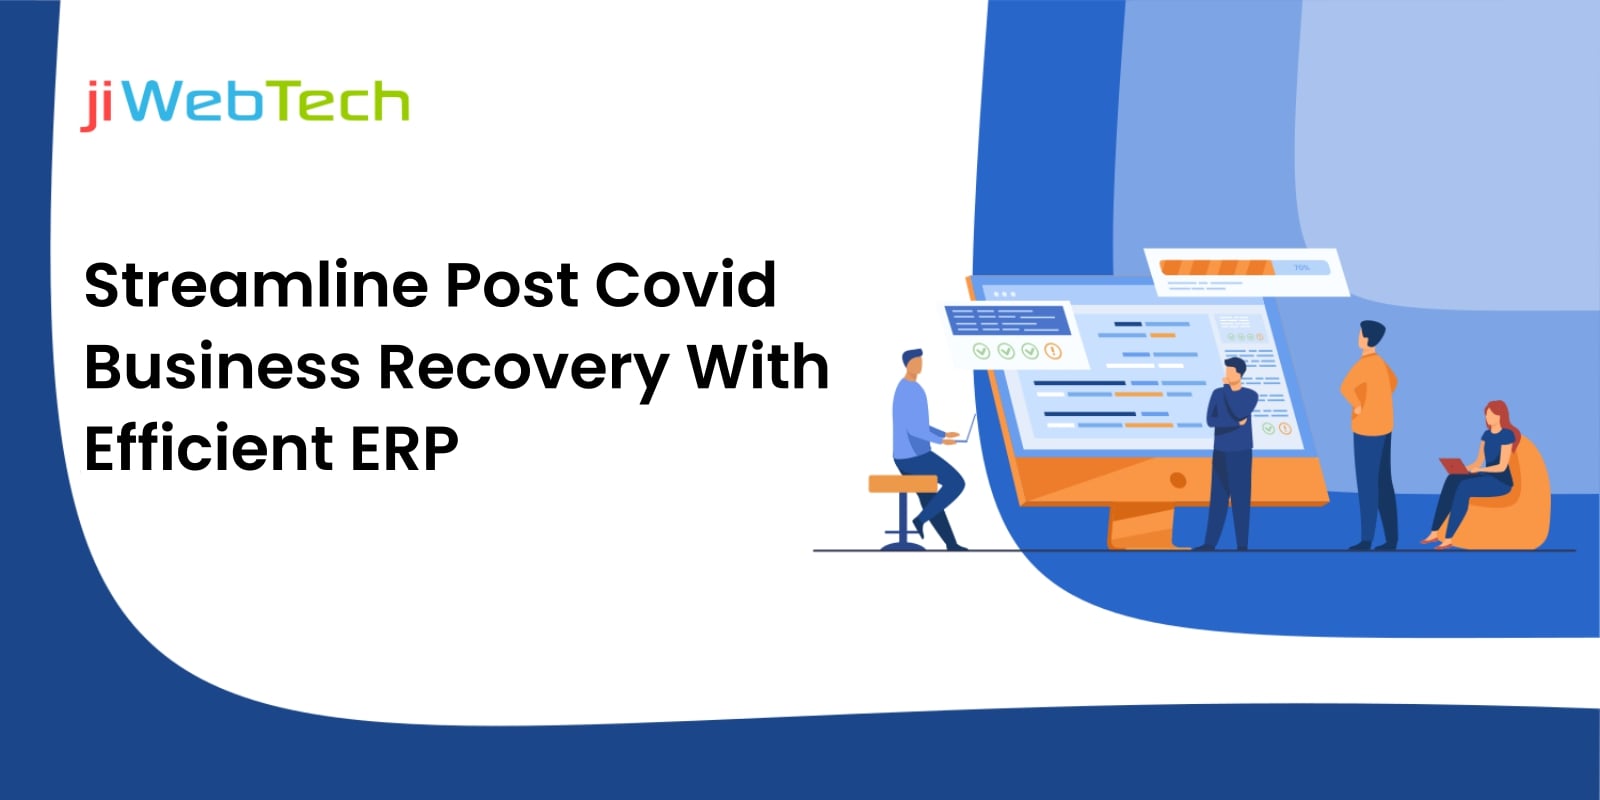 How Does An Efficient ERP System Streamline The Post COVID Business Recovery?